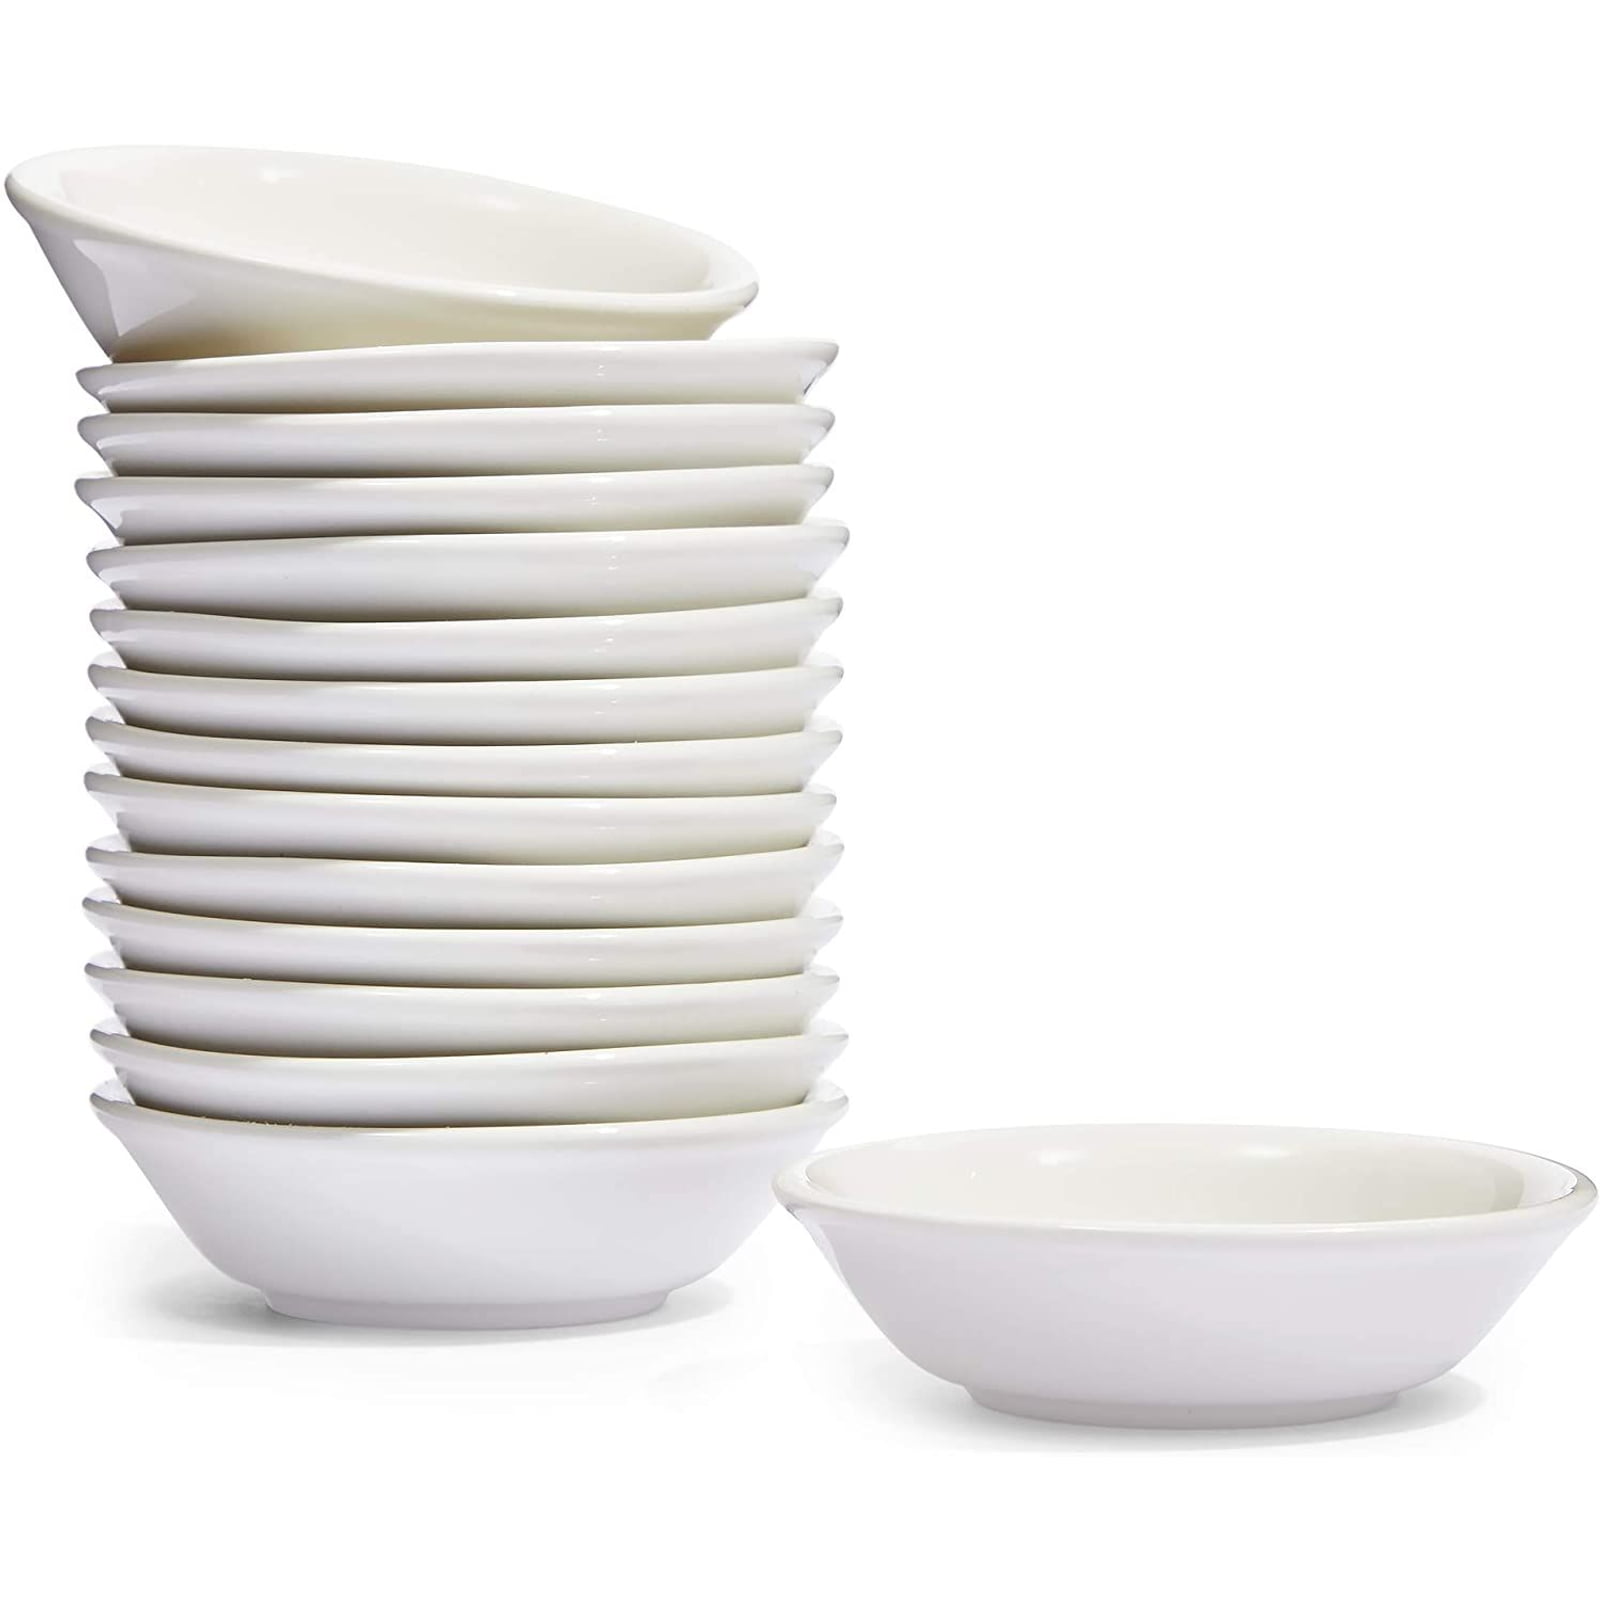 15 Pack Small Ceramic Dipping Sauce Bowls for Restaurants, Bars, Kitchen  (White, 3 x 1 Inches) 